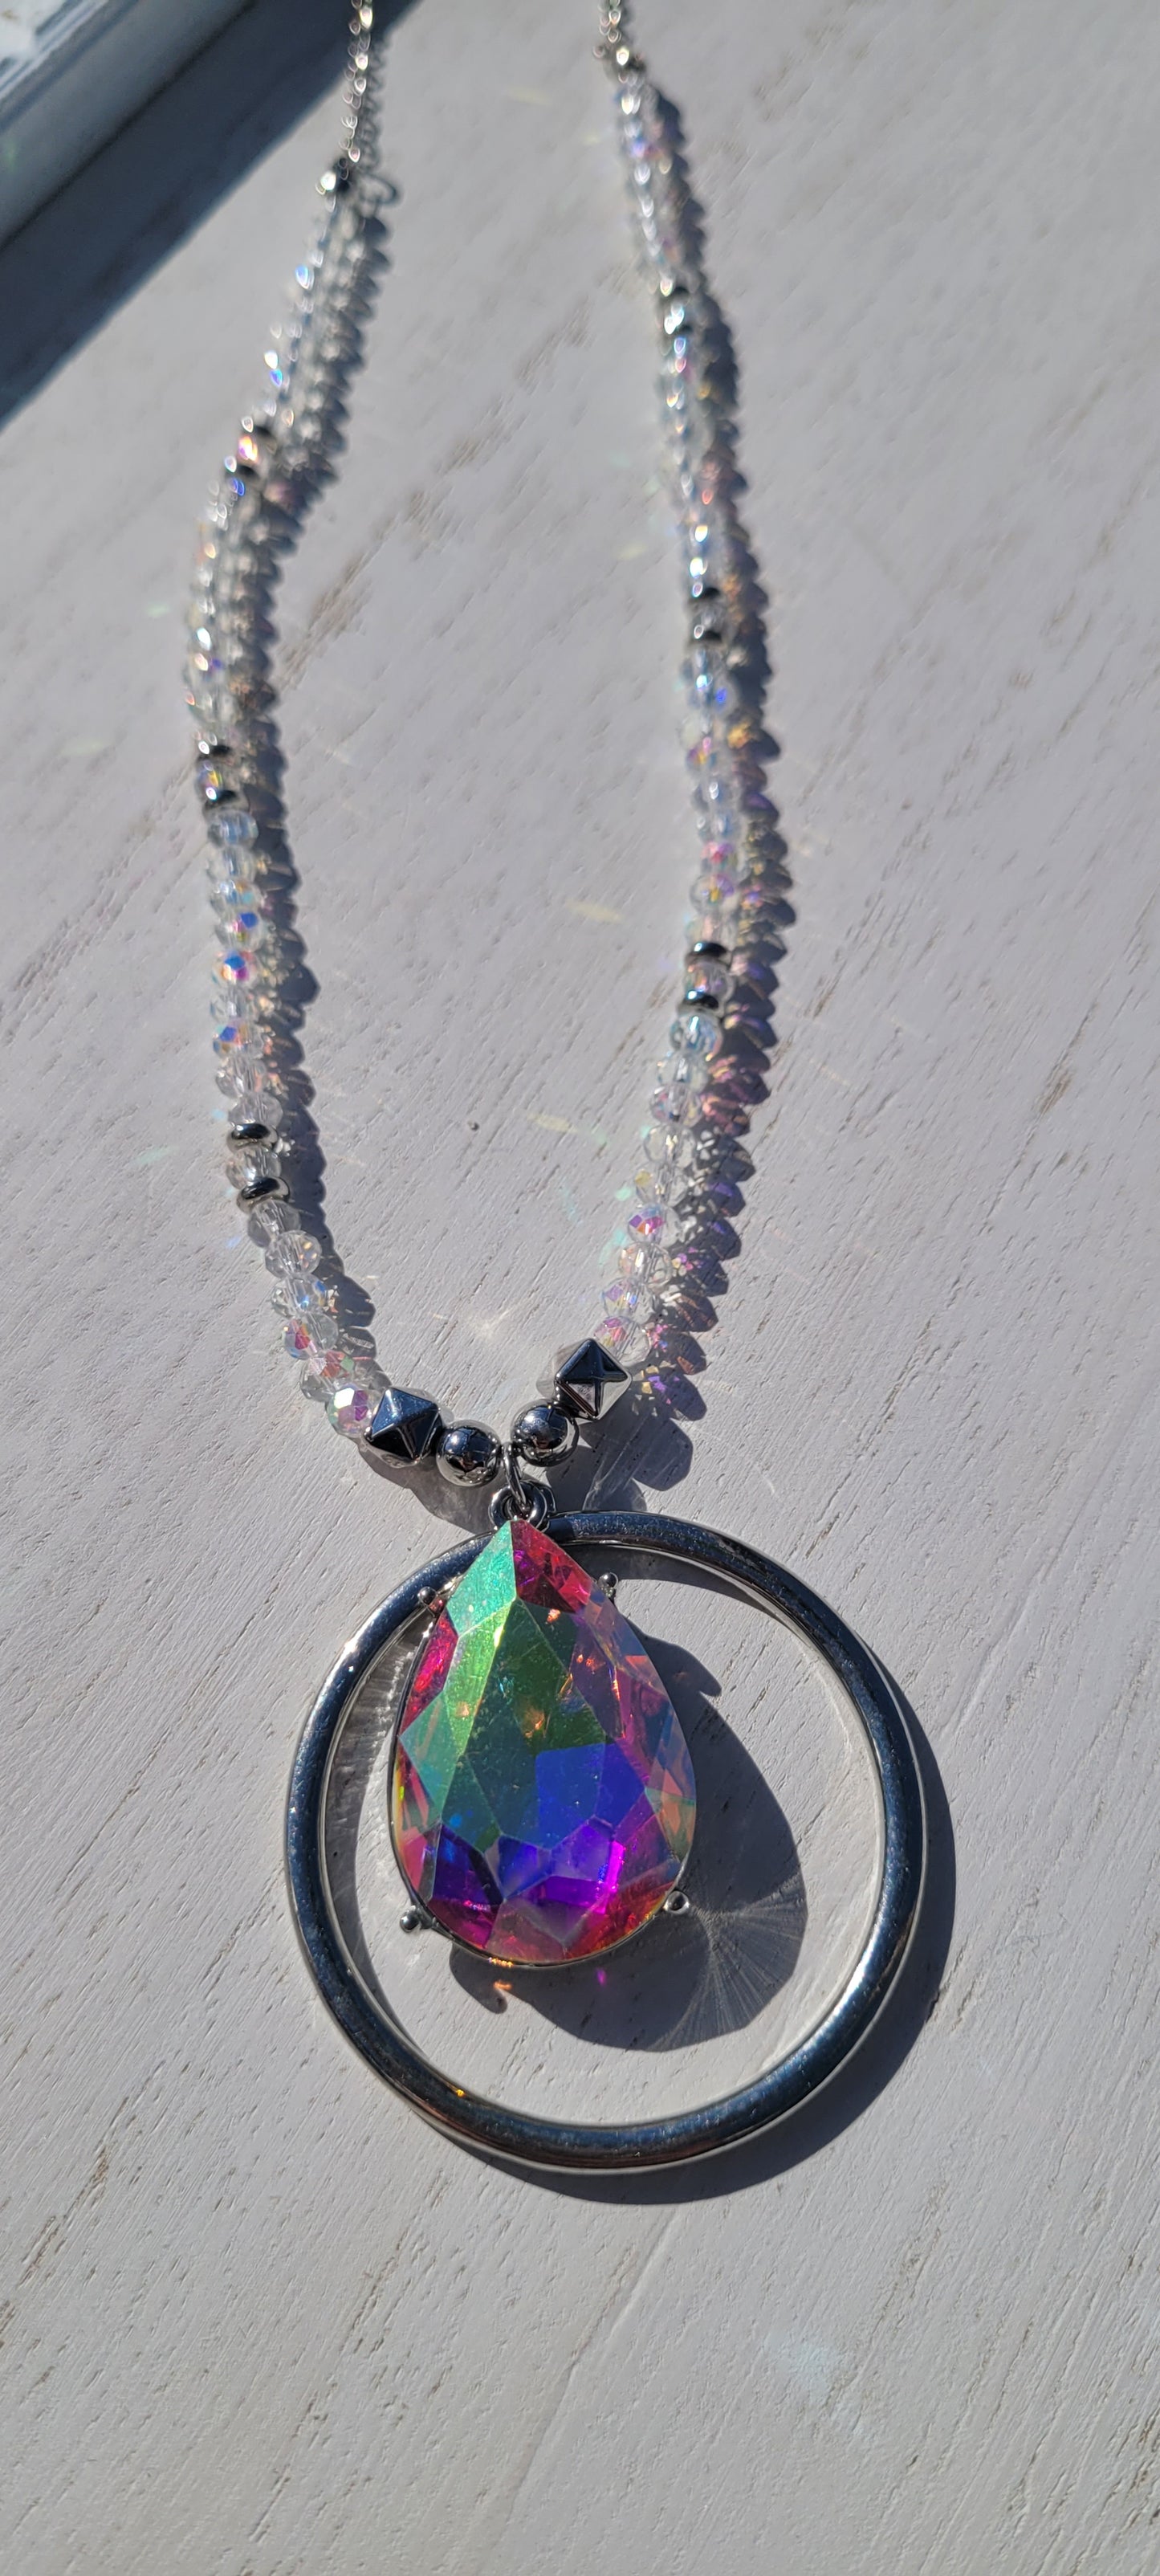 Pink Panache necklace Color: Clear bead and silver chain necklace with silver circle and AB teardrop pendant Limited supply!  